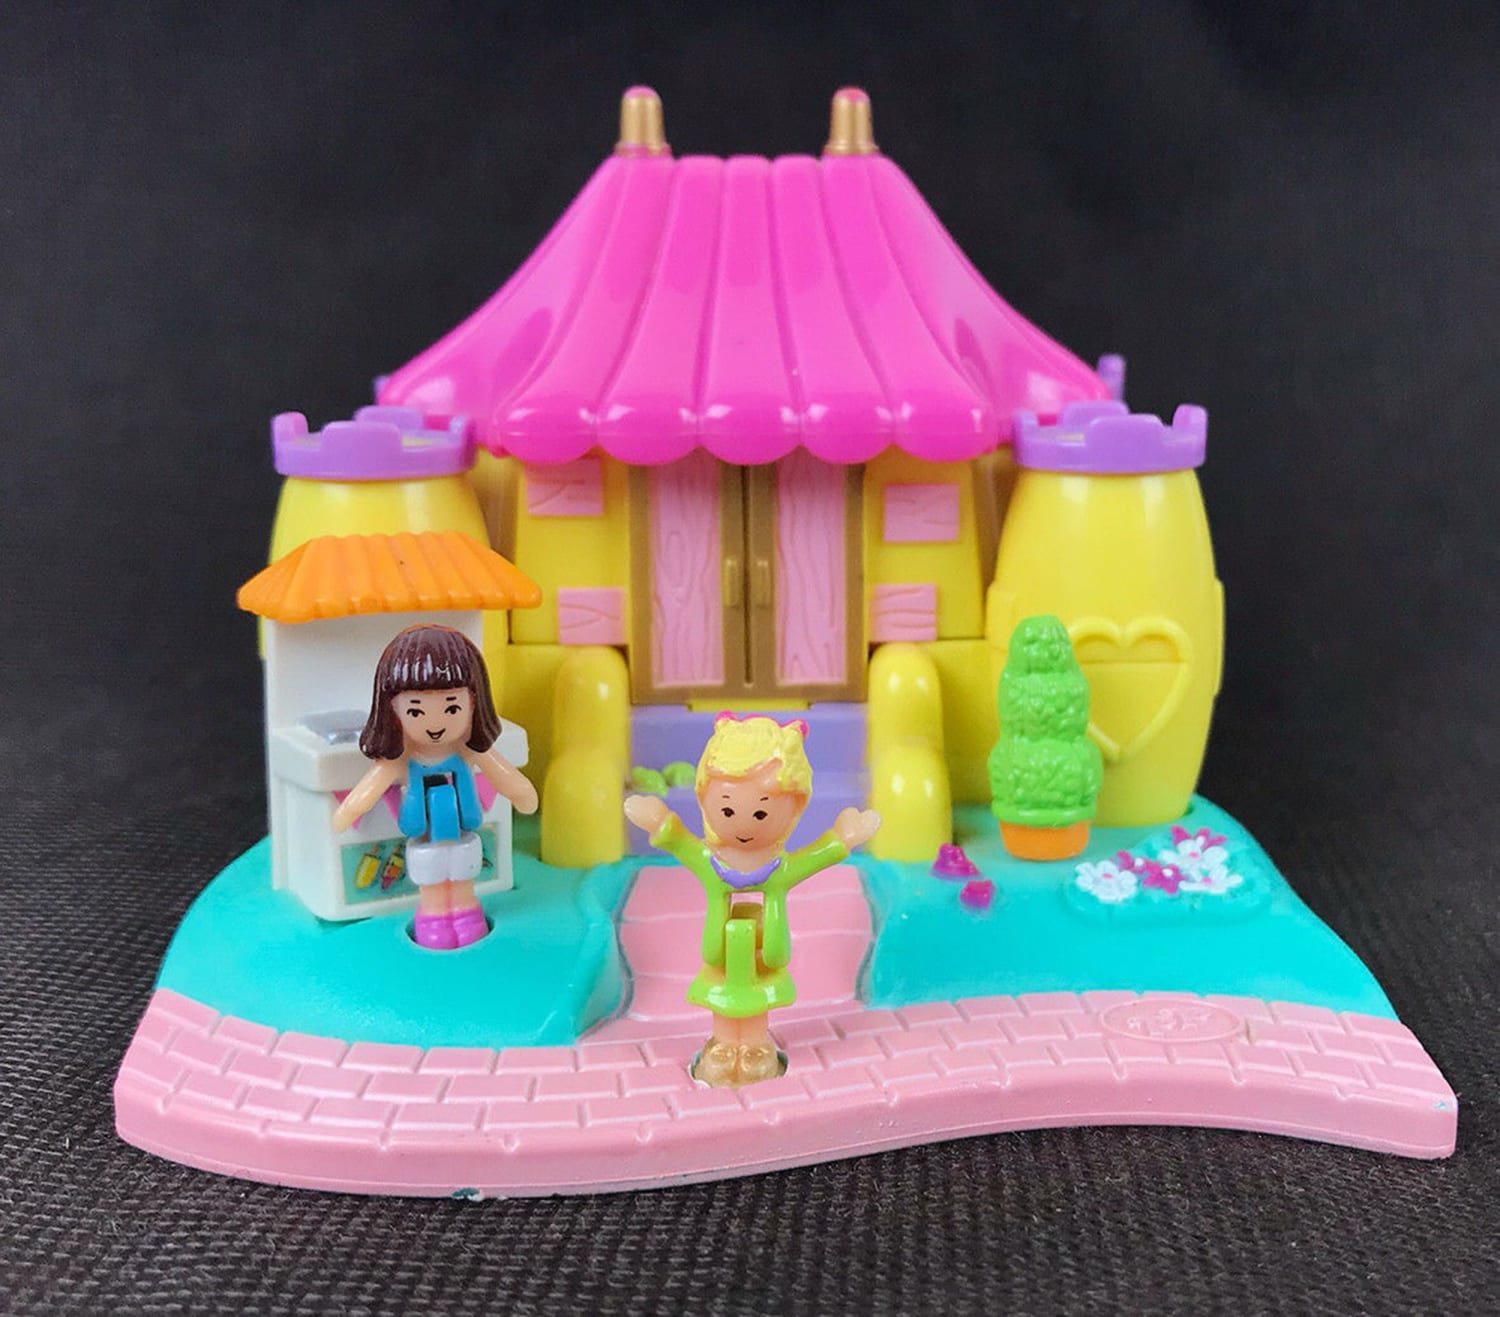 How much are polly pockets worth